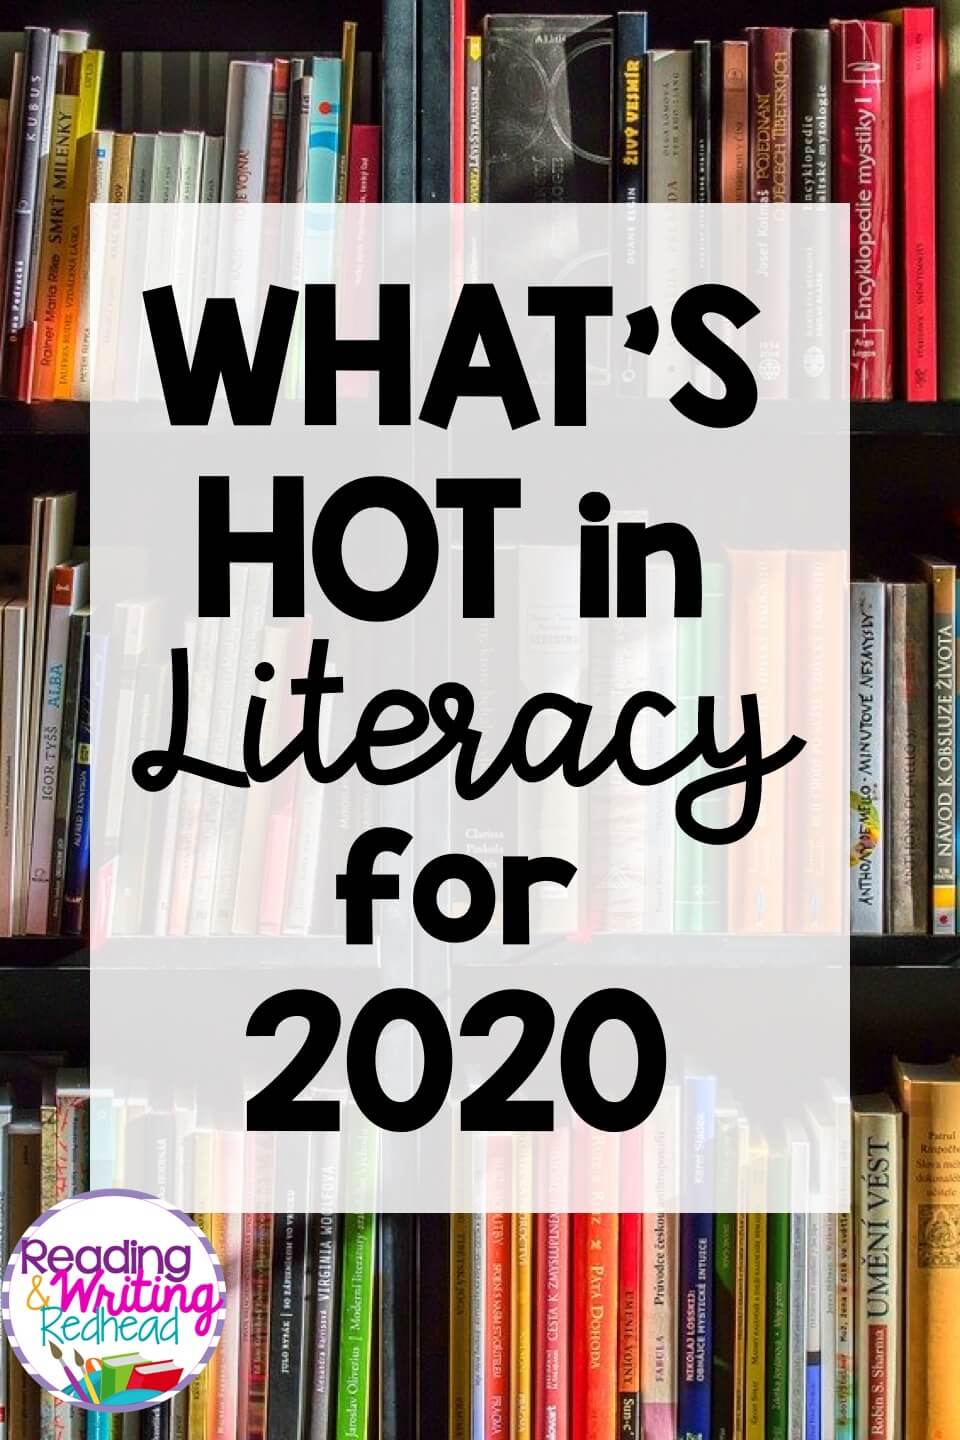 Bookshelf with pin for What's hot in literayc